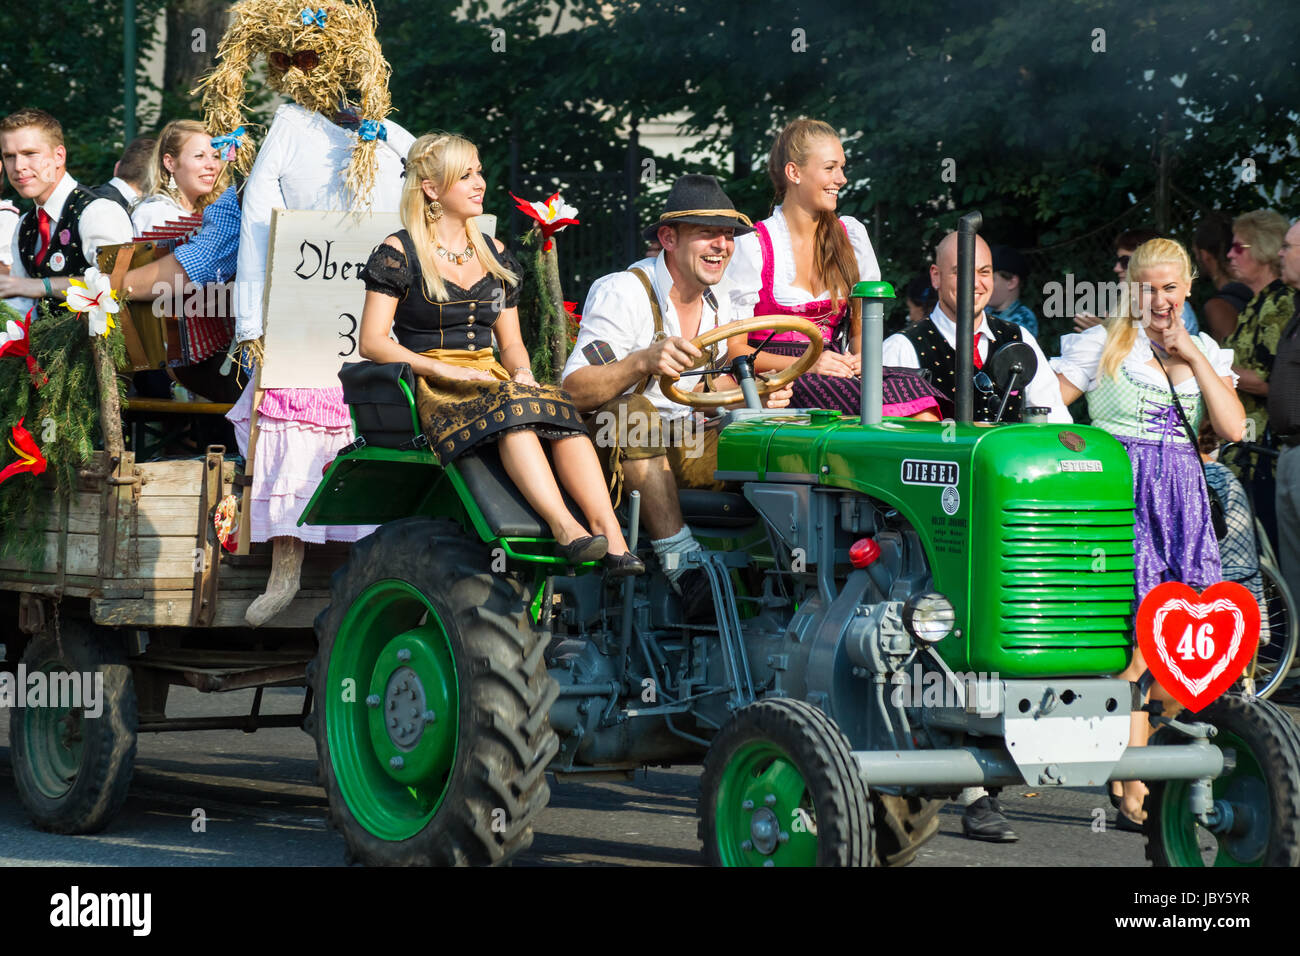 VILLACH, AUSTRIA - AUGUST 4: Participants riding a tractor at the procession of 'Villacher Kirchtag', the largest traditional folk festival in Austria, August 4, 2012 in Villach, Austria. Stock Photo